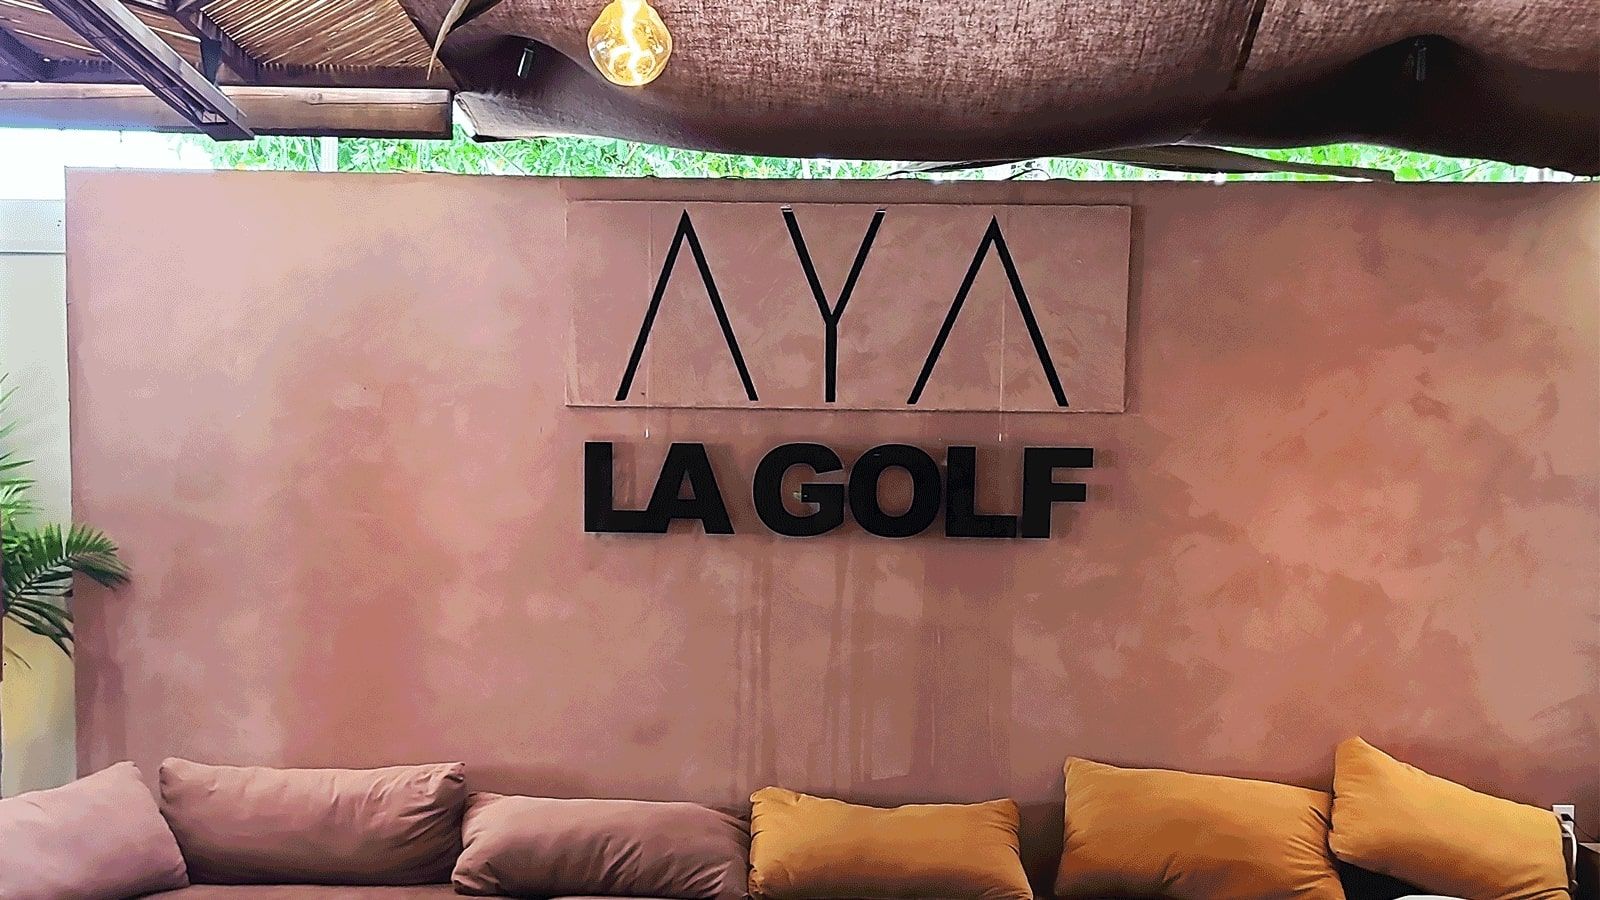 LA Golf interior sign attached to the wall